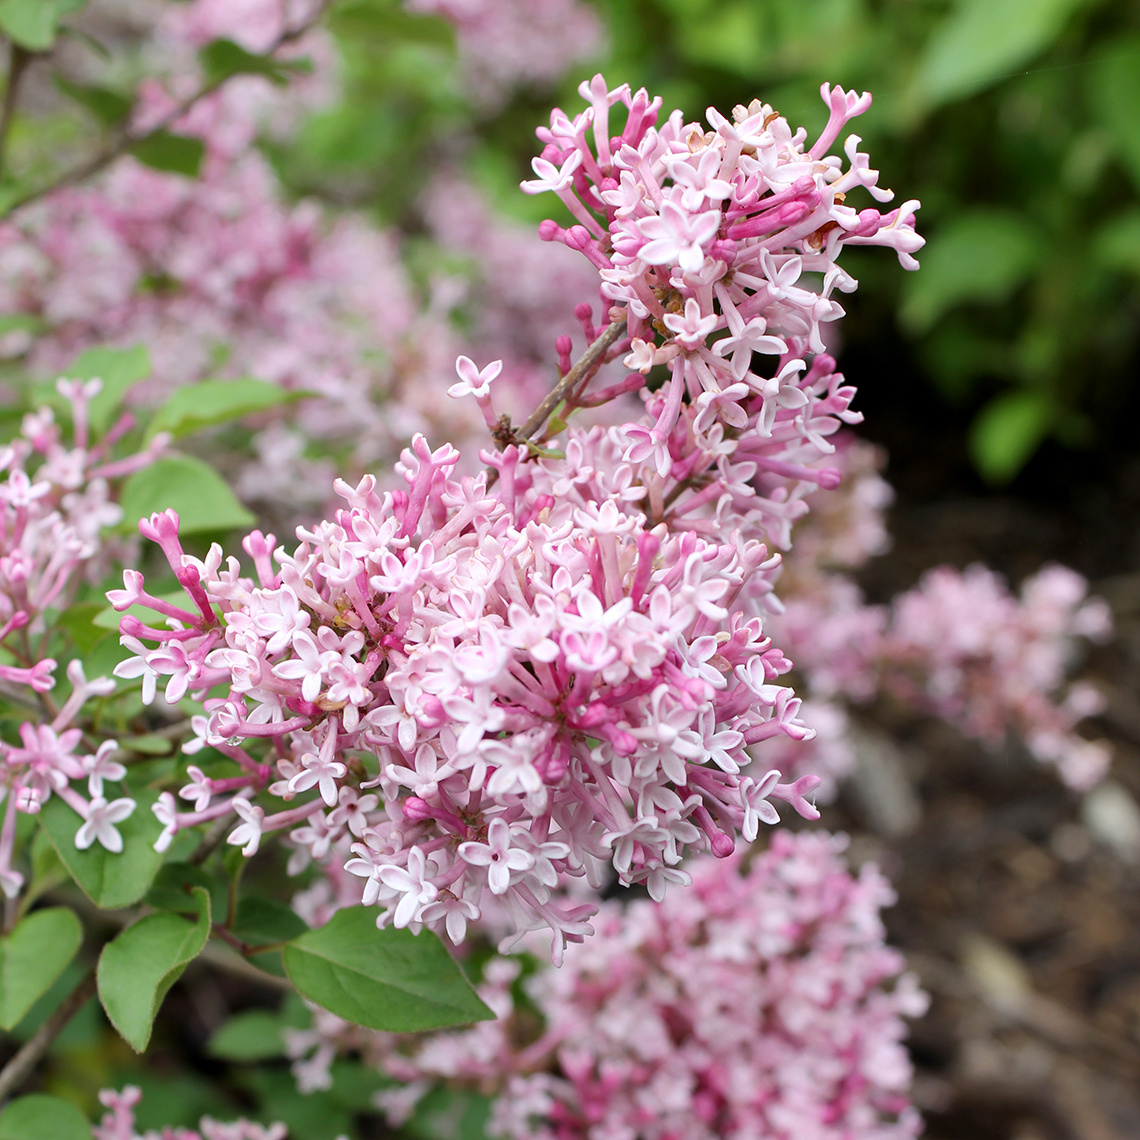 Scent and Sensibility dwarf lilac flowers